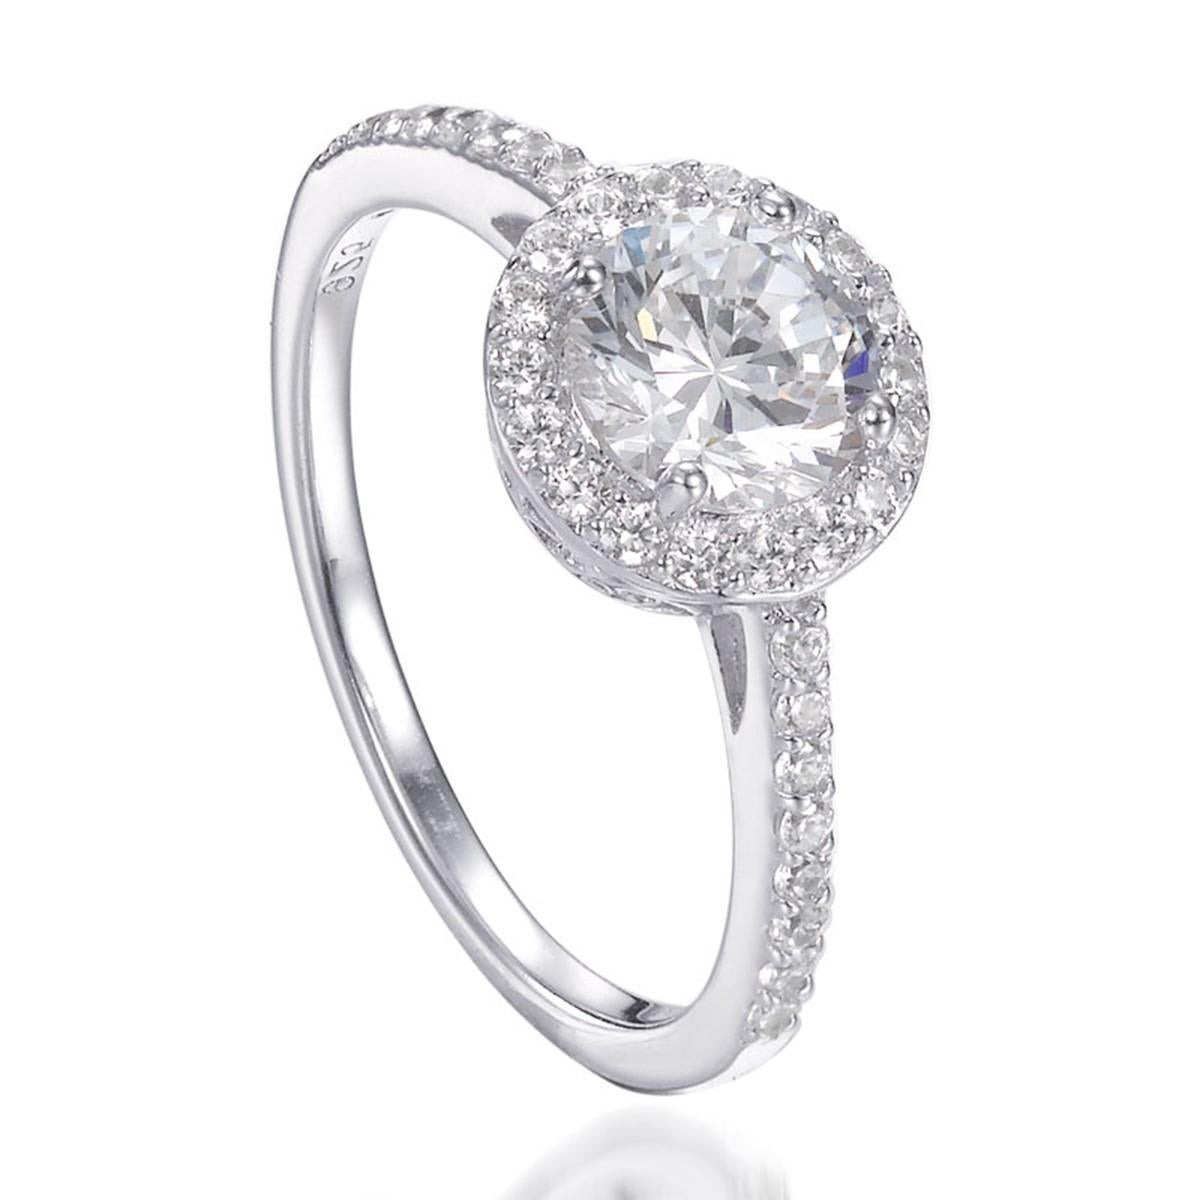 An alluring halo of diamonds embrace and accentuate the 1.82ct centre brilliant cut in this antique-style ring. Smaller brilliant cut accents on the shoulders add a truly dazzling effect.

Composed of 925 sterling silver with a high gloss white